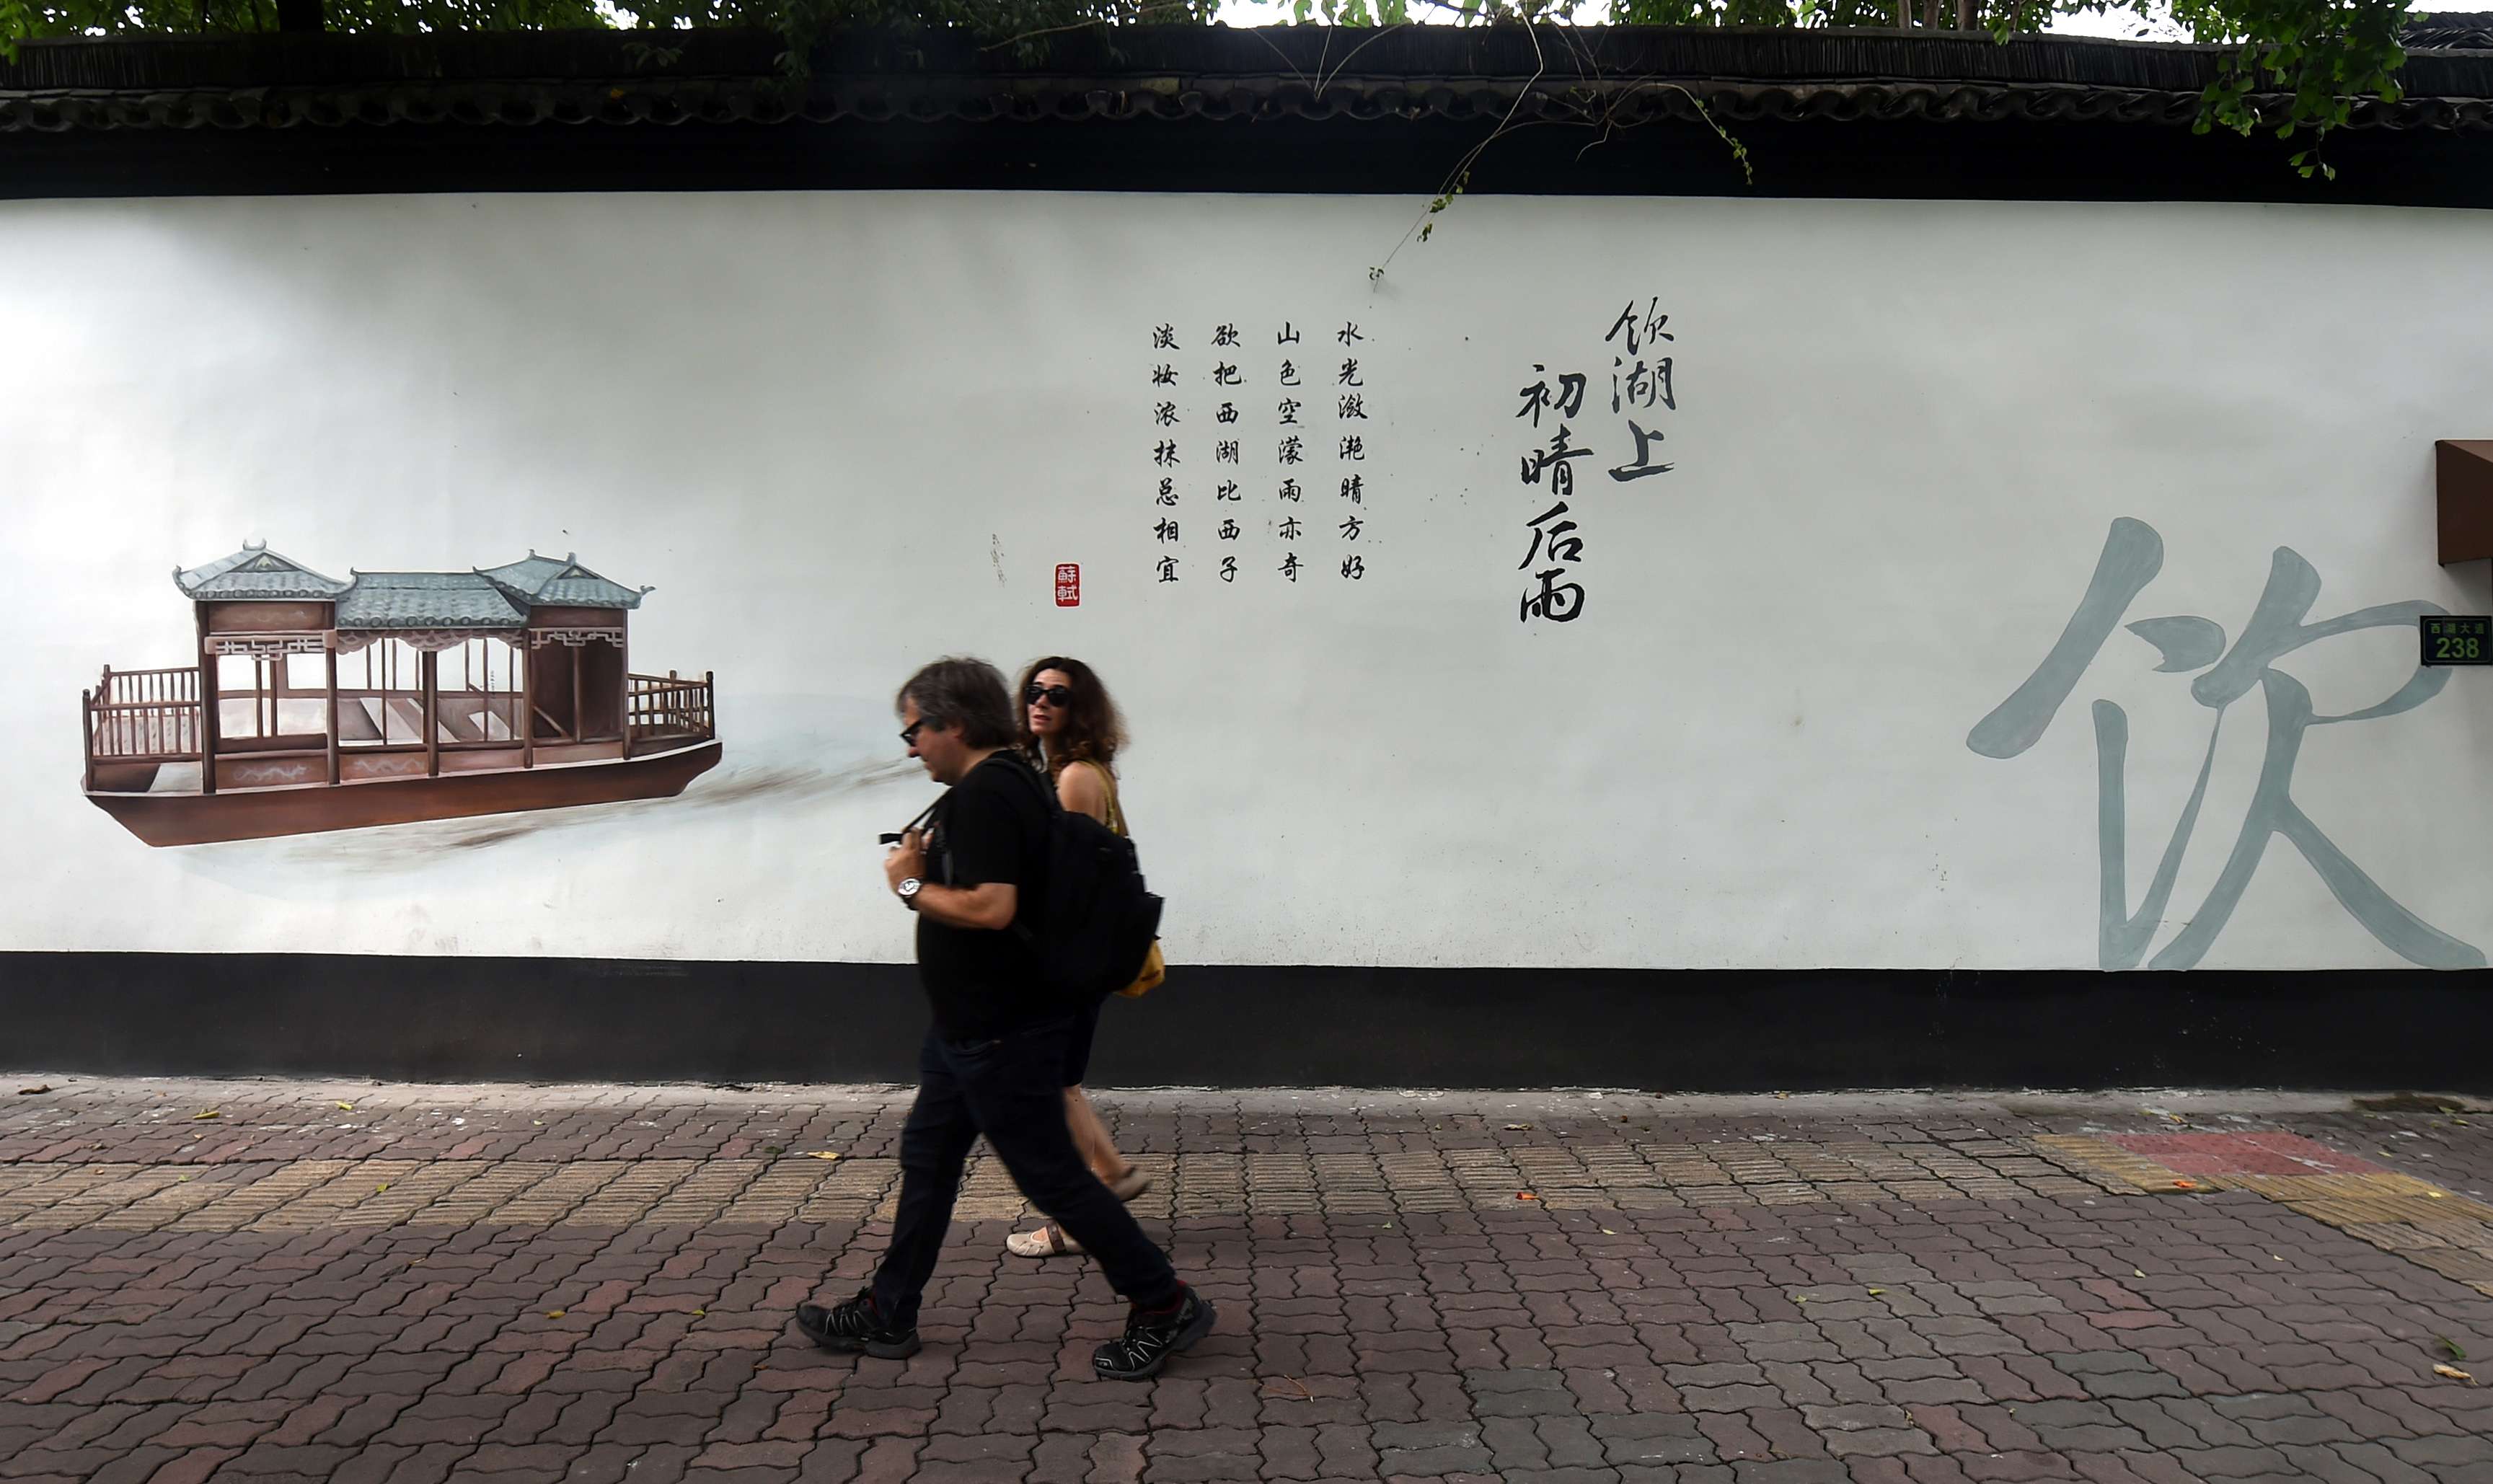 Hangzhou city’s Zhiyinmajing Lane, which dates back to the Song dynasty, received a makeover ahead of the G20 summit next month. The centre of gravity of the world is moving to the East, according to some commentators. Photo: Xinhua